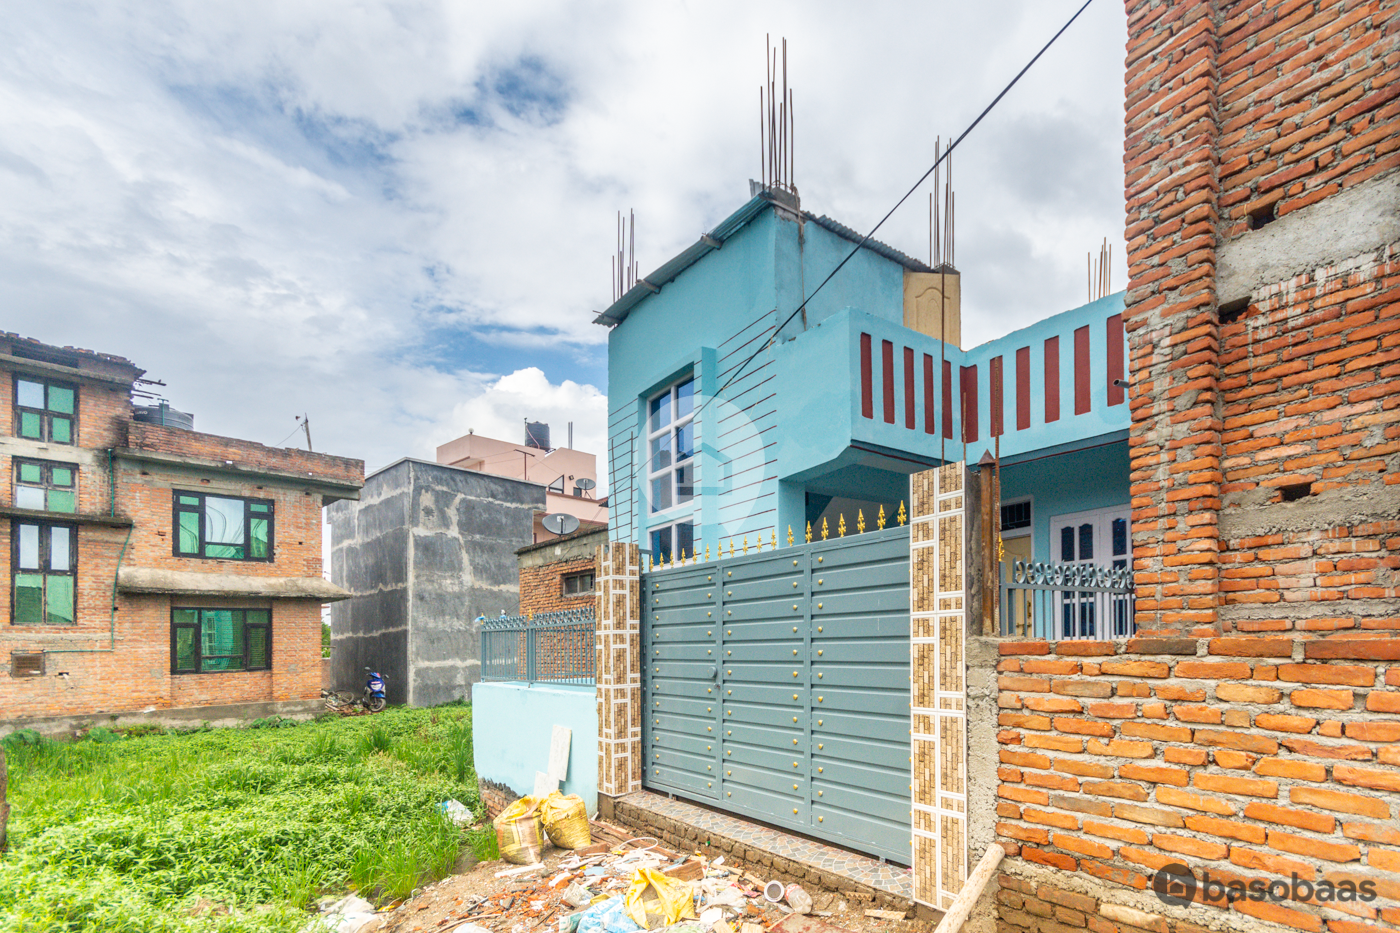 SOLD OUT : House for Sale in Imadol, Lalitpur Image 3